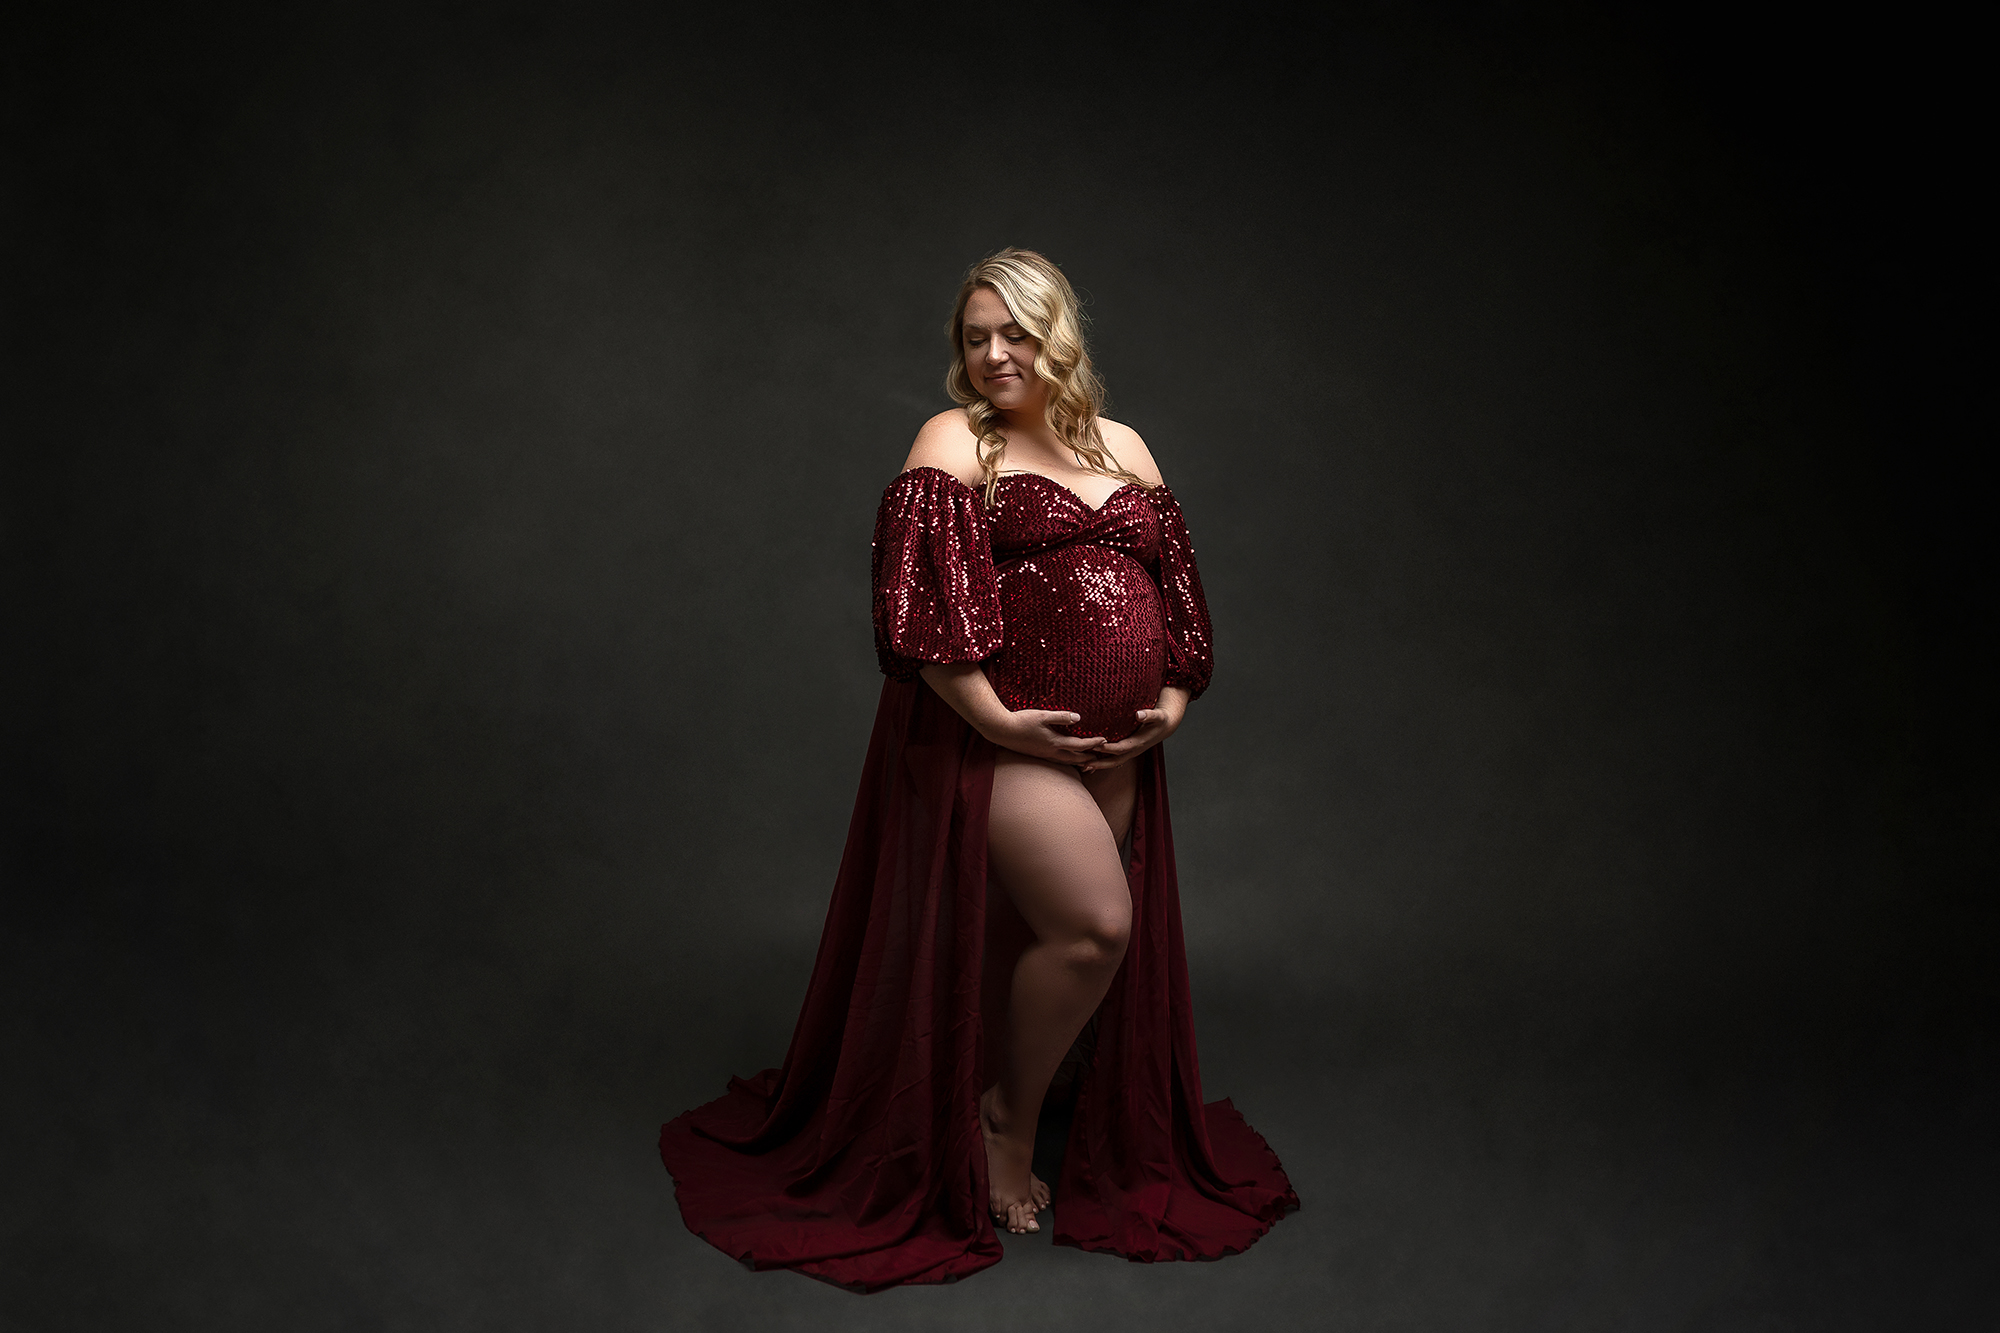 Pregnant mother wearing a maroon dress.